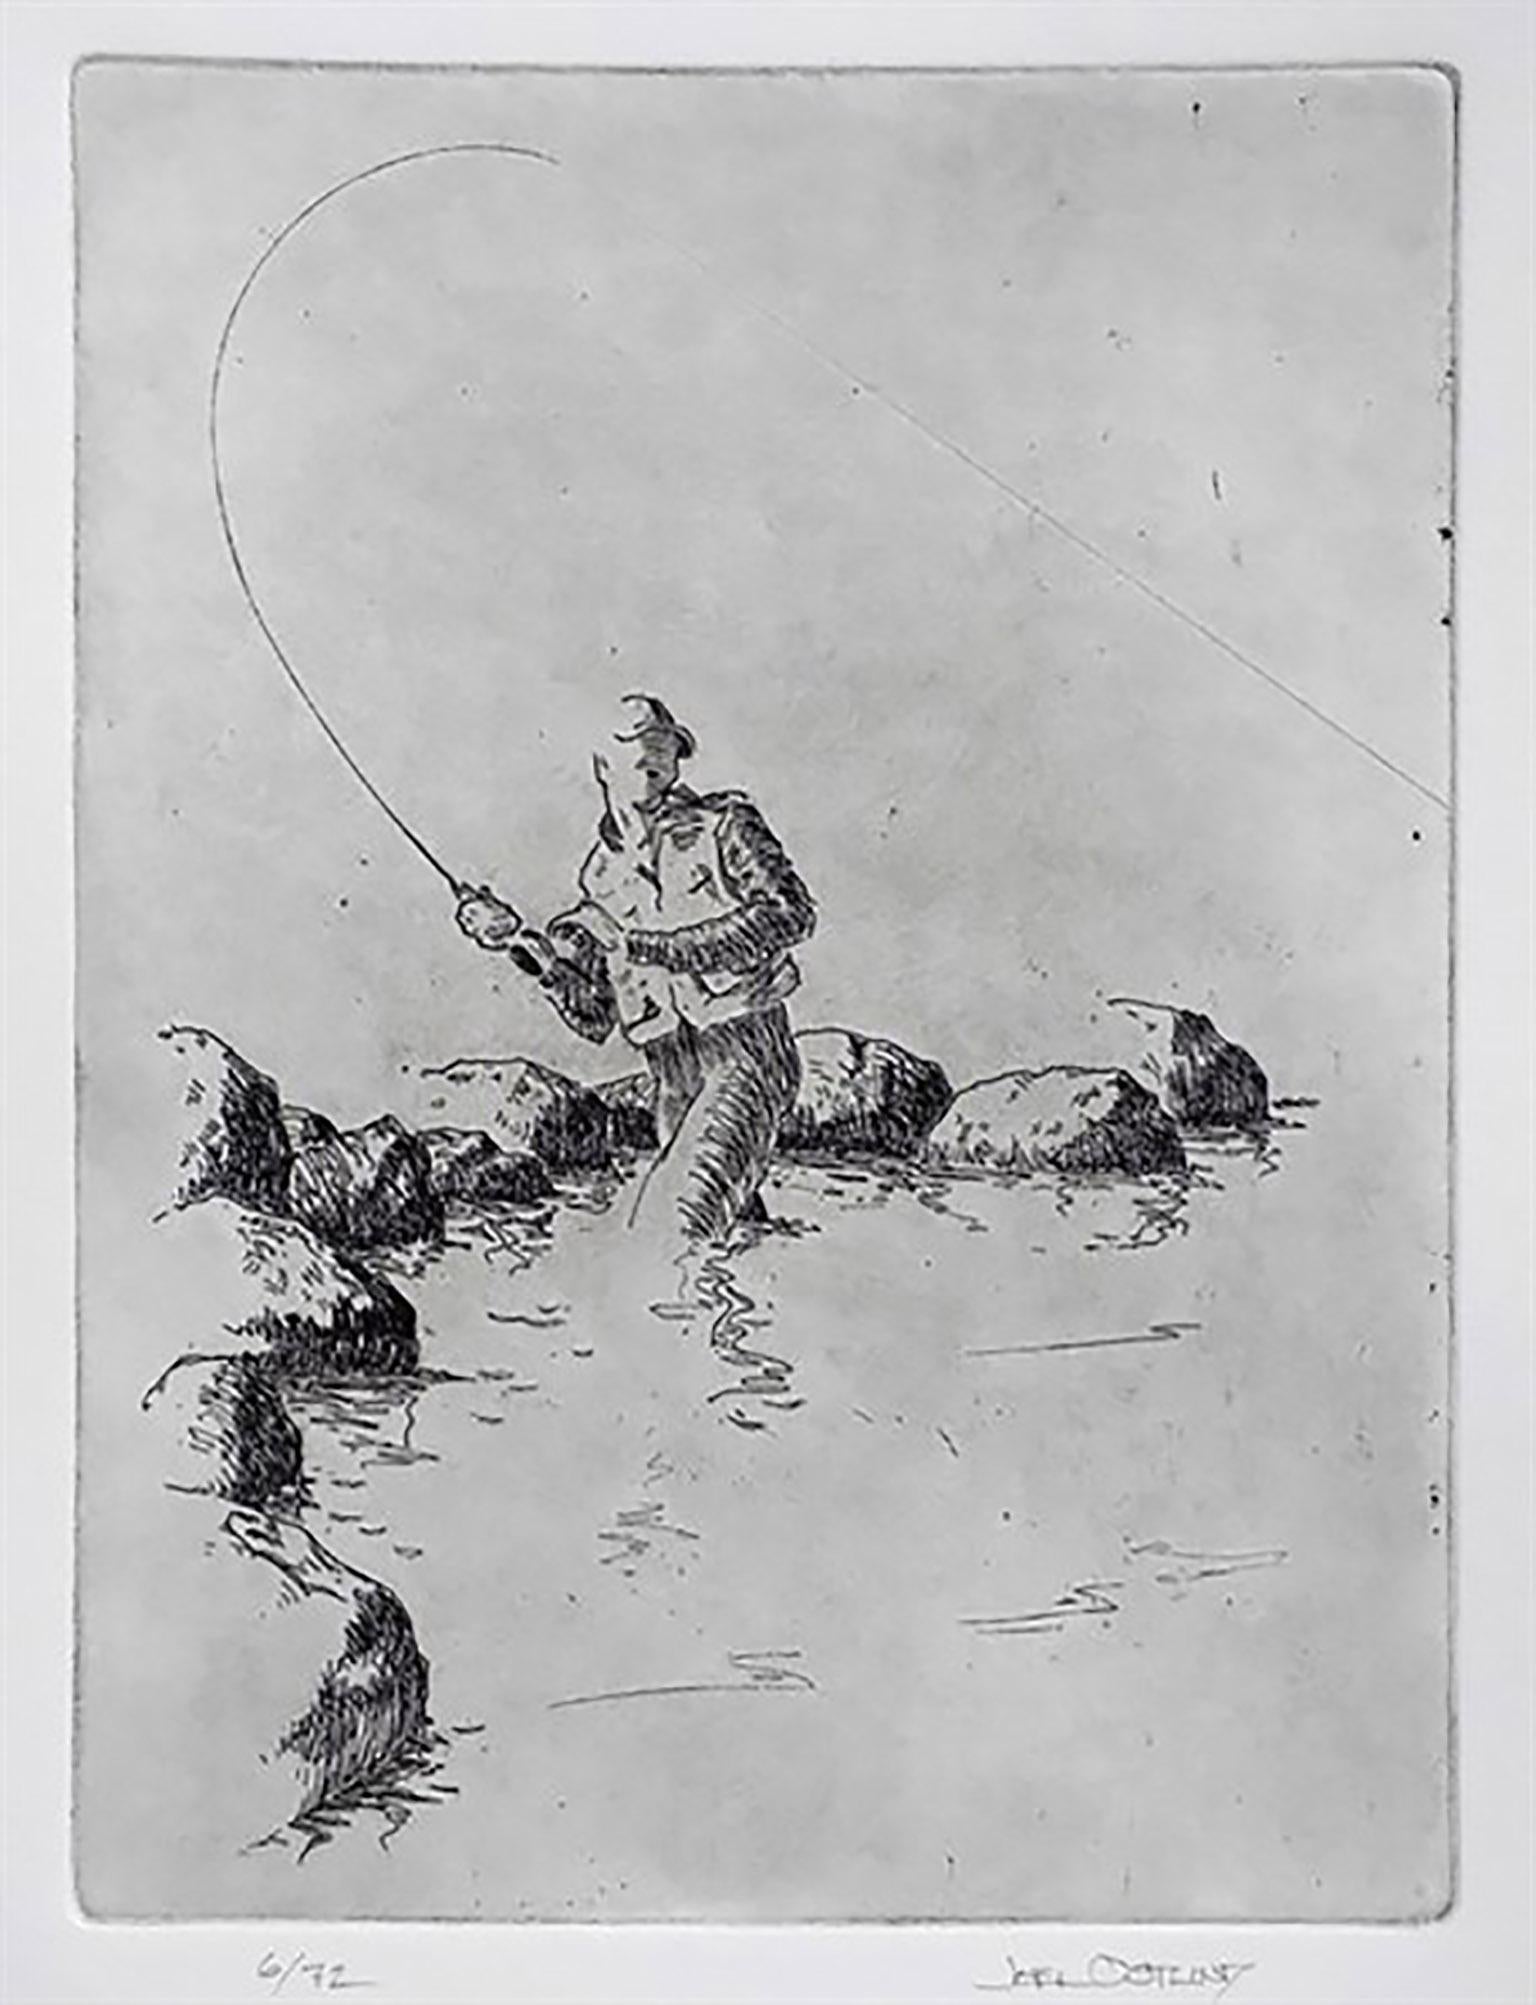 Joel Ostlind Portrait Print - A Bend in a Straight Line 21/72 (fly fishing, river's edge, casting)